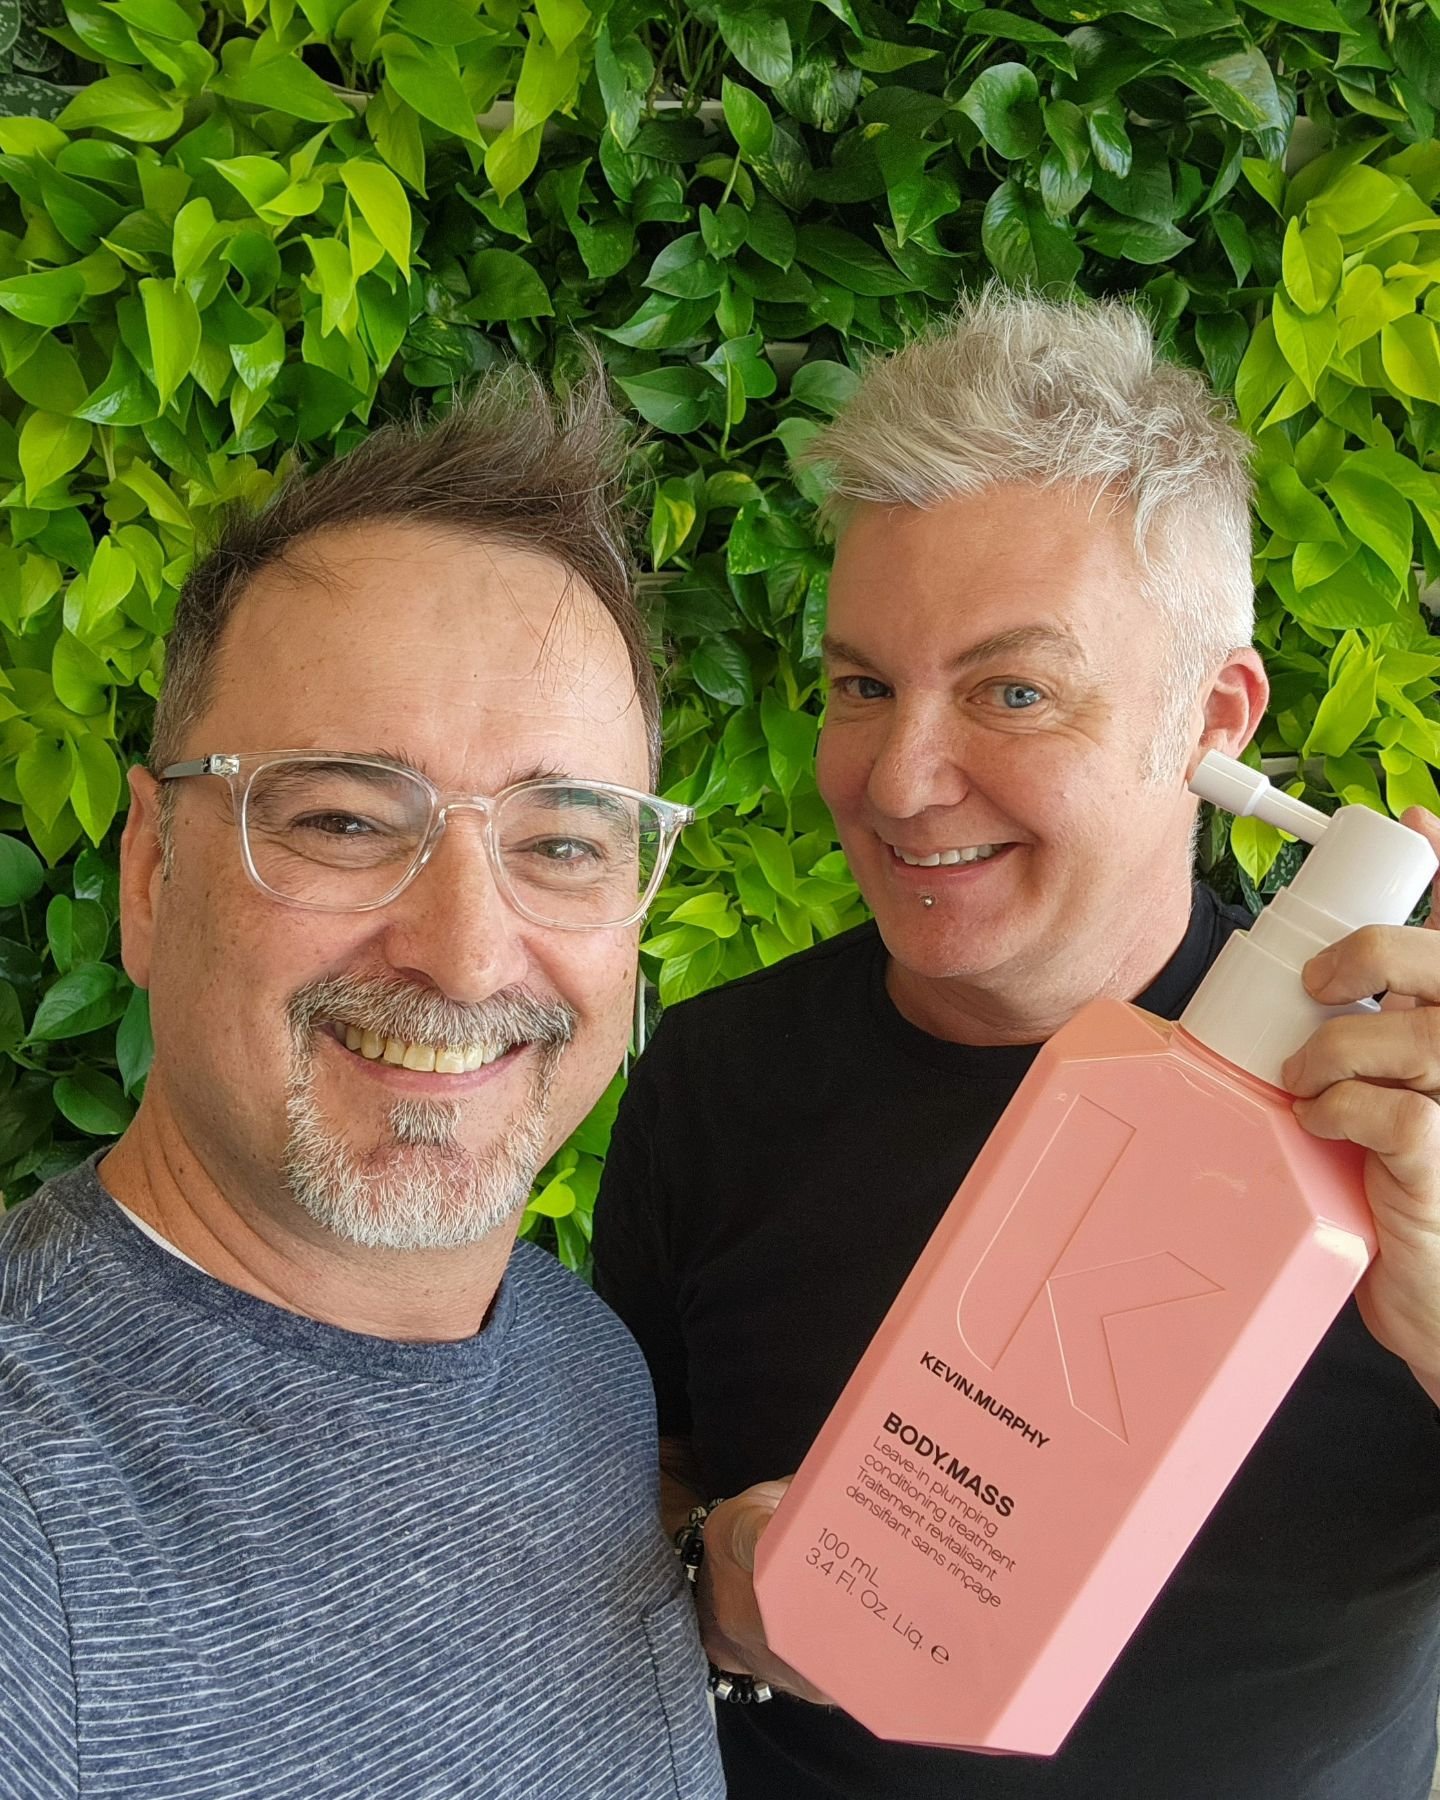 This weekend, Balance Hair Spa owners Biff &amp; Thomas were treated to salon education by Kevin Murphy at their North America headquarters in Salt Lake City. They got to see a behind the scenes look at the brand's photo shoots, got some business cla